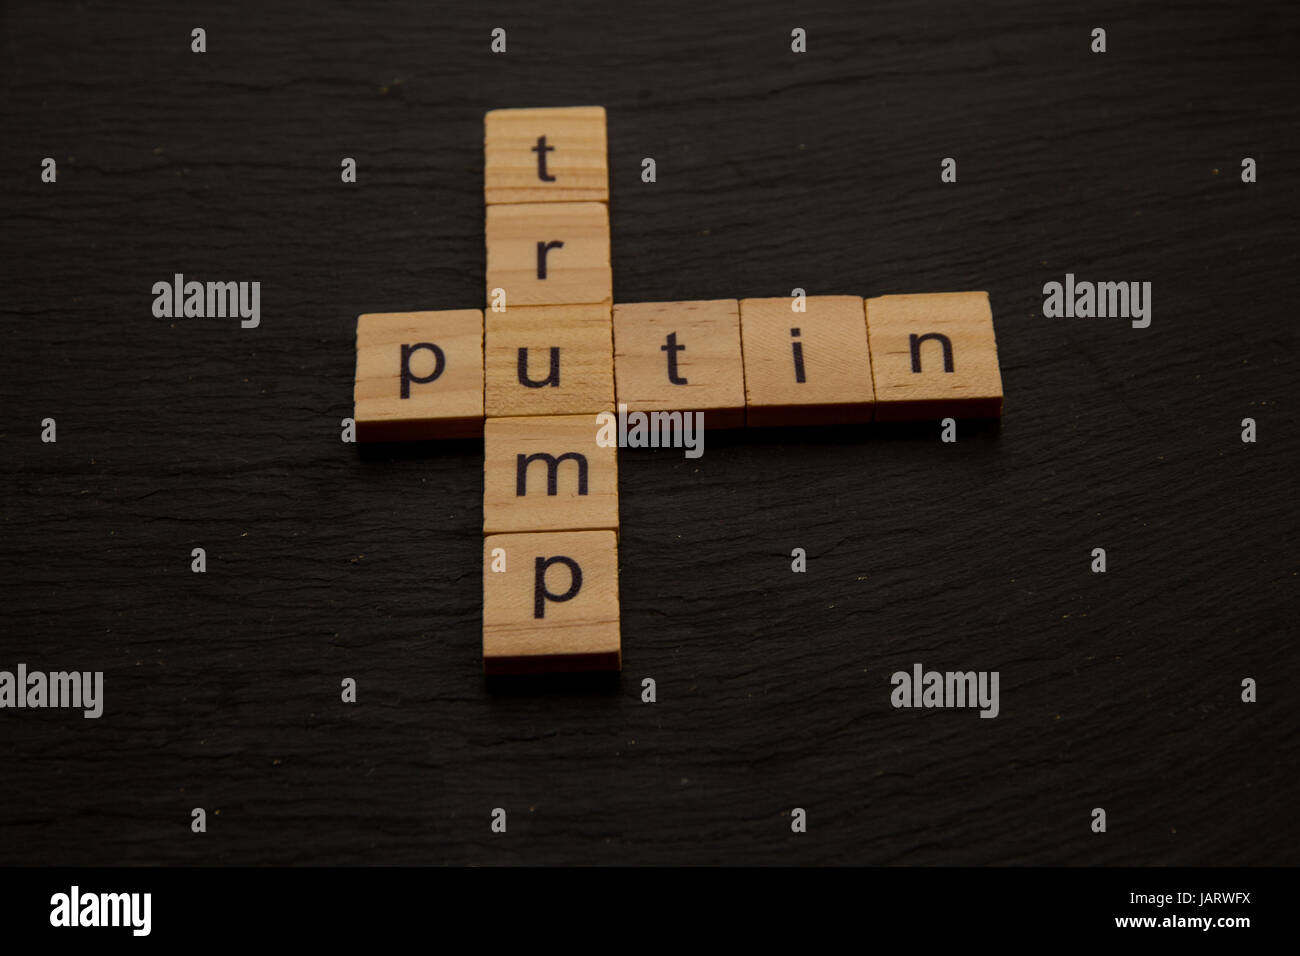 Toy letter blocks showing Trump and Putin like a crossword Stock Photo